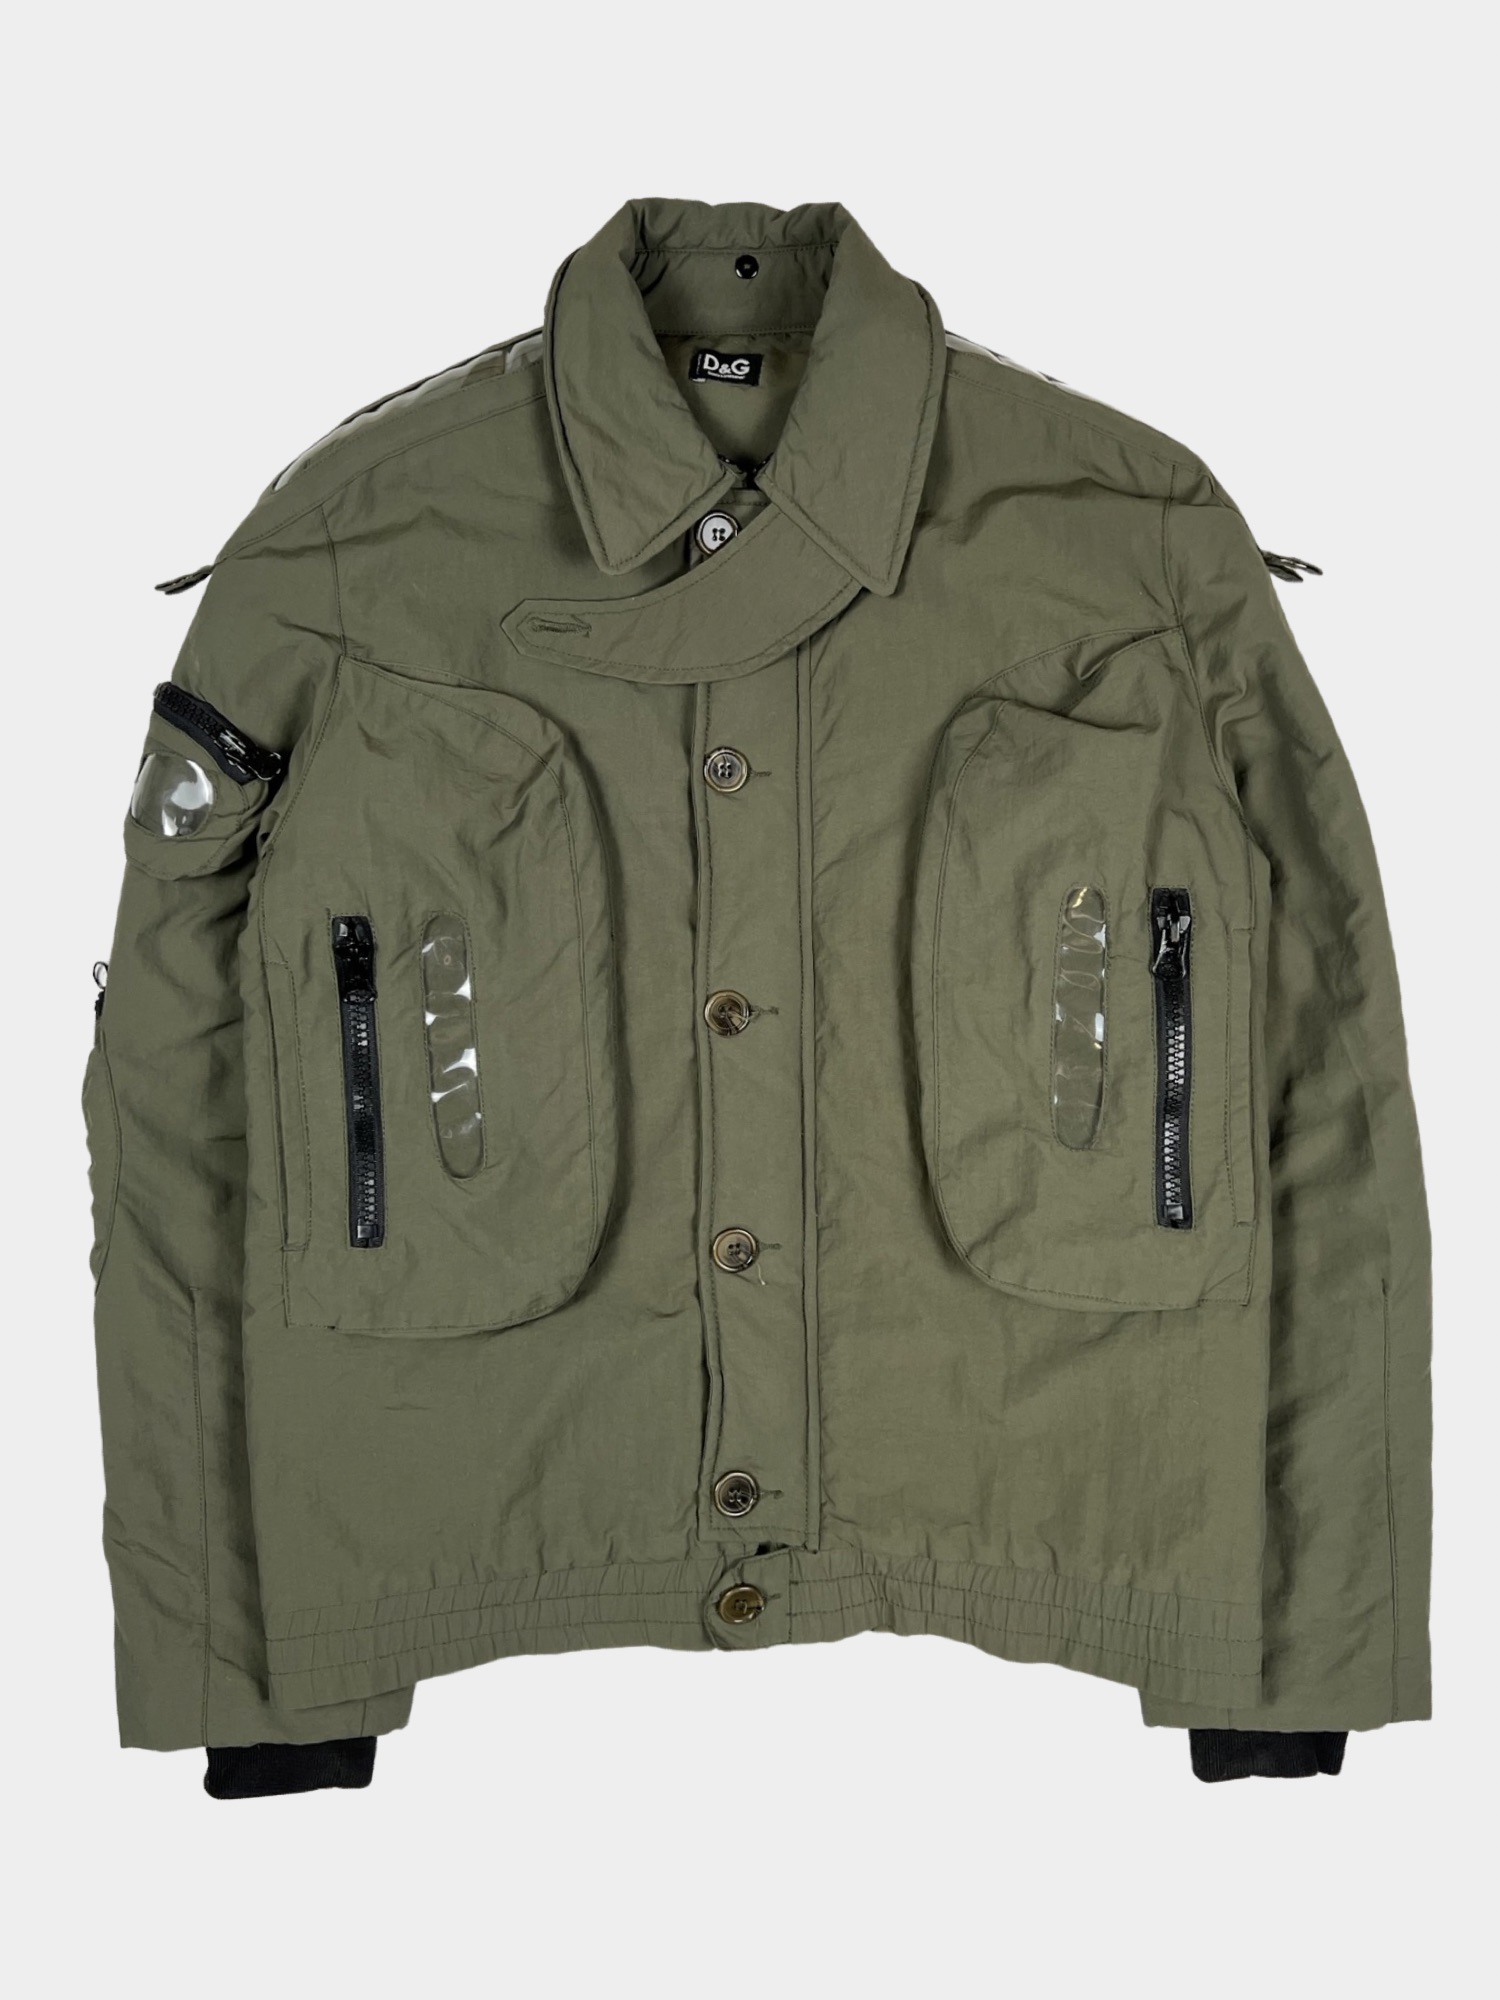 Dolce & Gabbana AW2003 Goggle Military Jacket - ARCHIVED